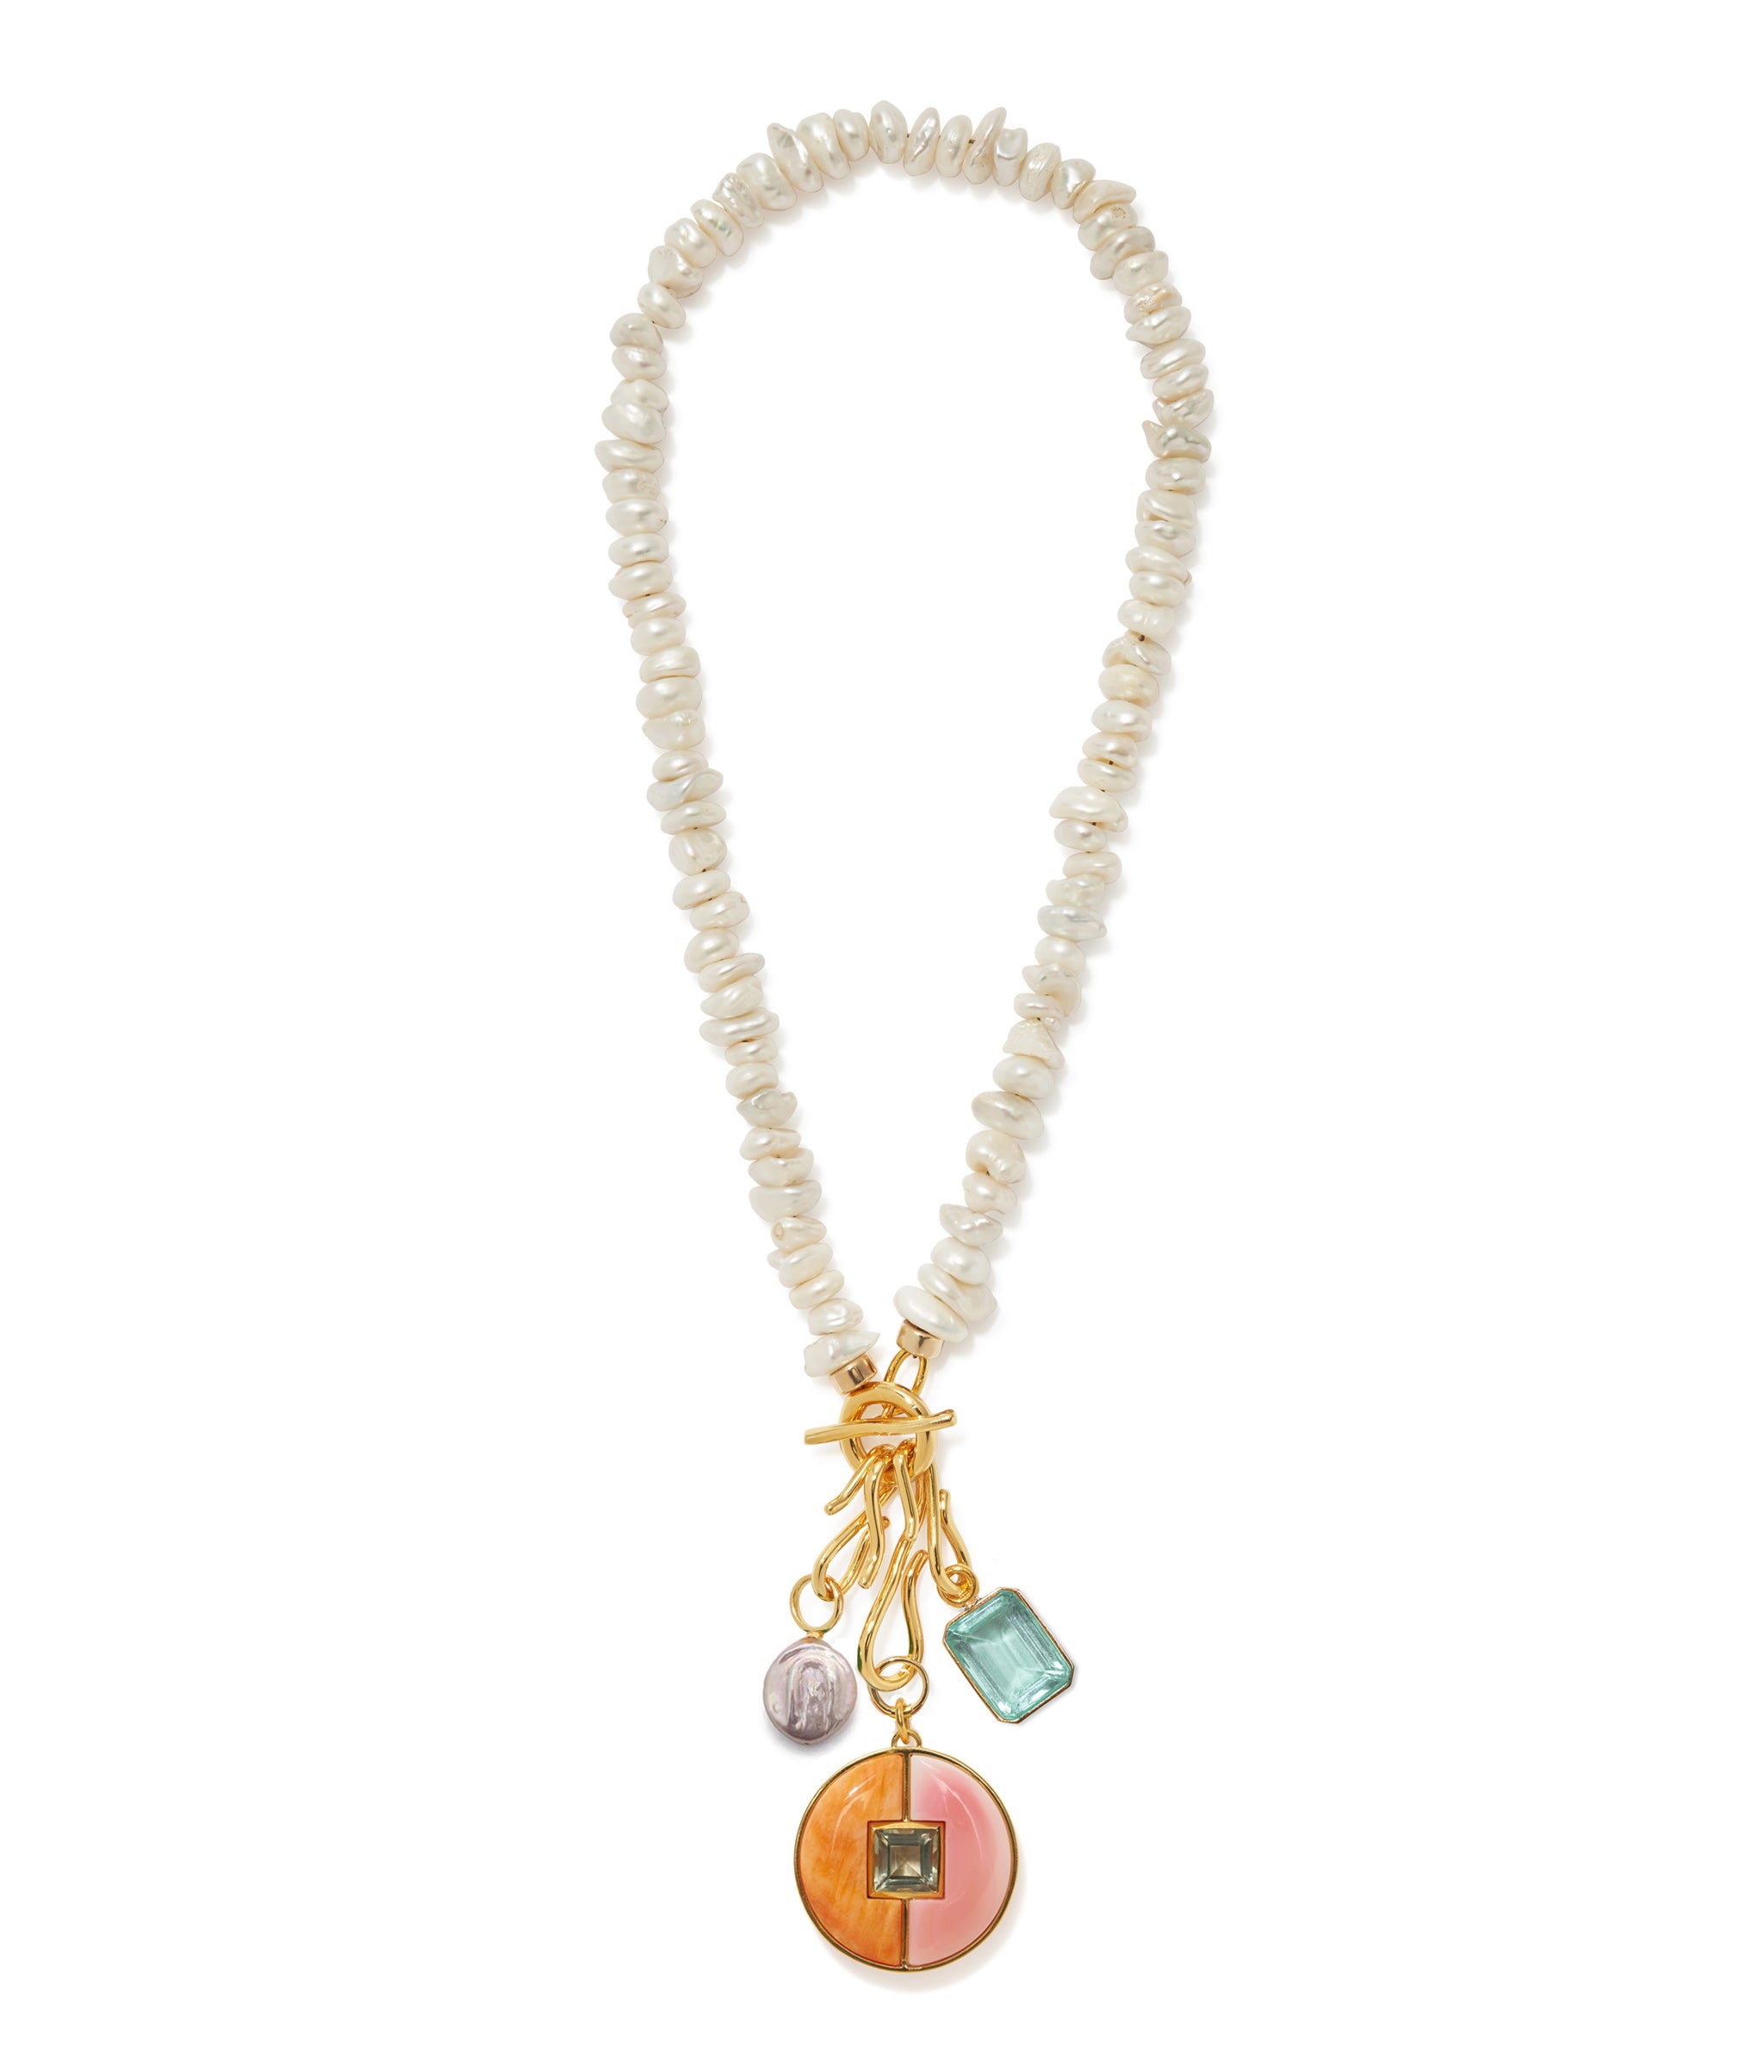 Mood Necklace in Pearl with Porto Pendant in Sorbet, Pink Coin Pearl and Candyland charm in Aquamarine.